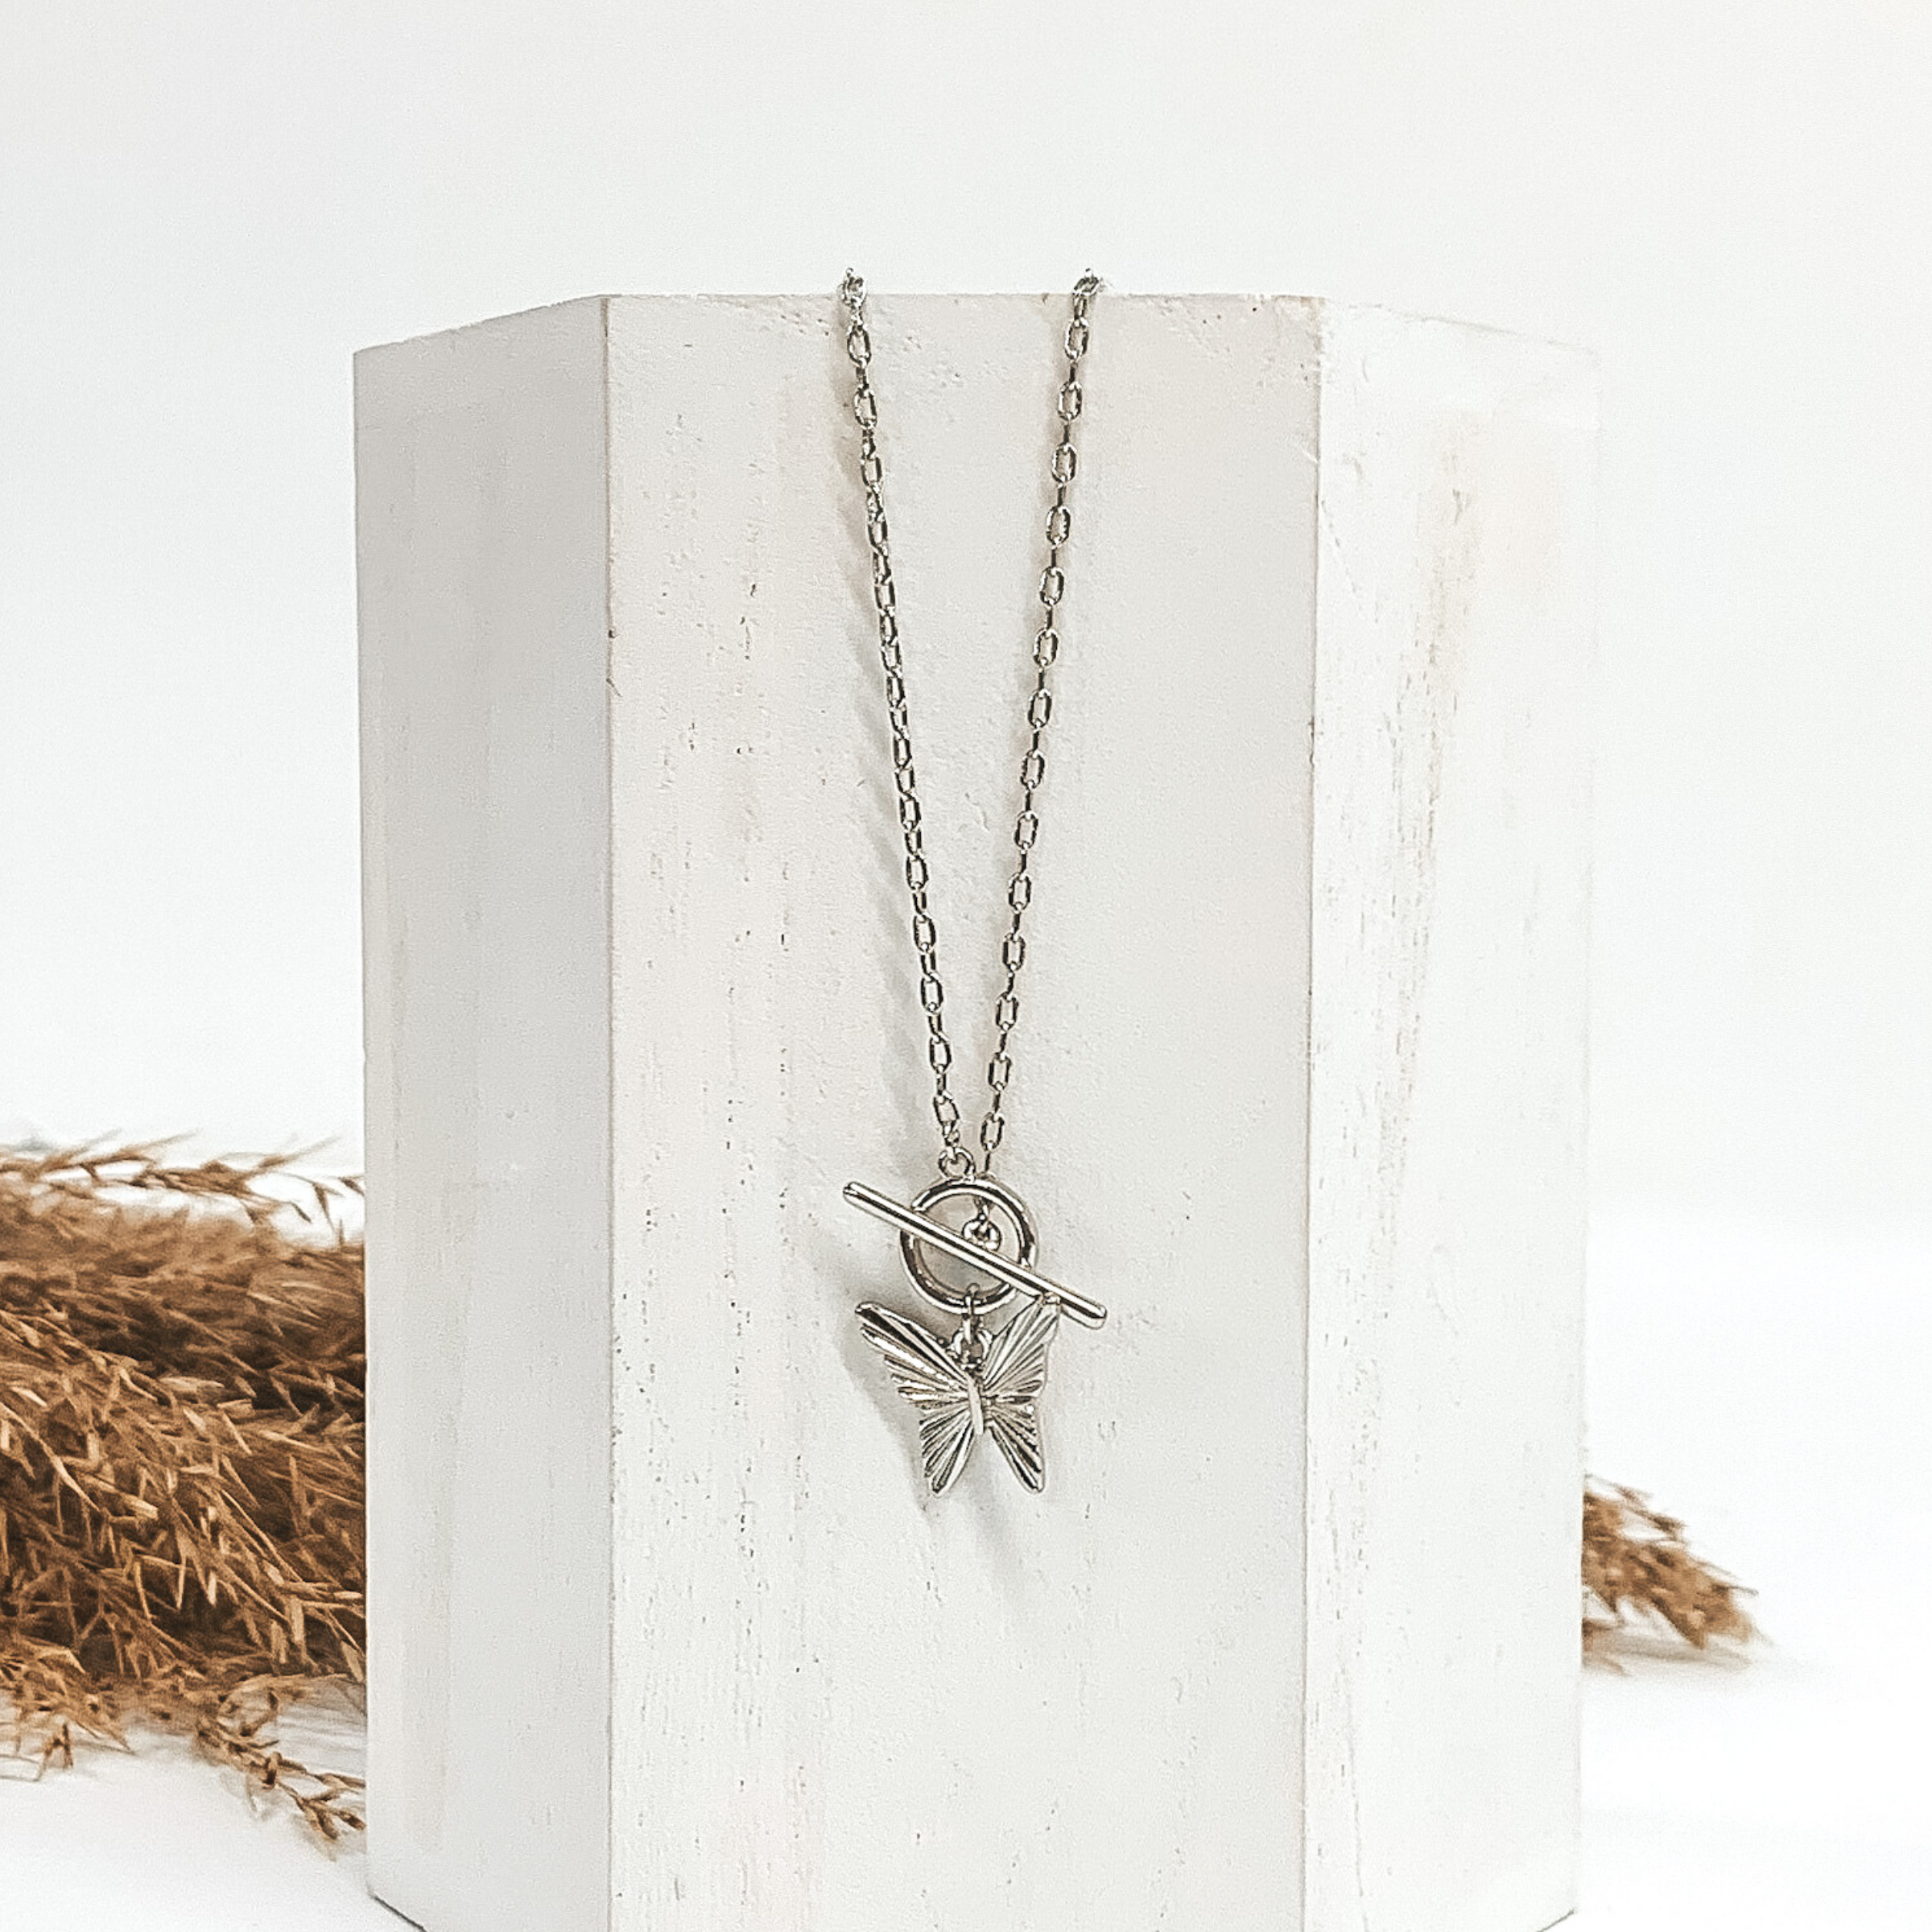 Silver chain necklace with toggle clasp and a hanging silver butterfly pendant. This necklace is laying on a piece of white wood that is in front of a white background with brown floral.